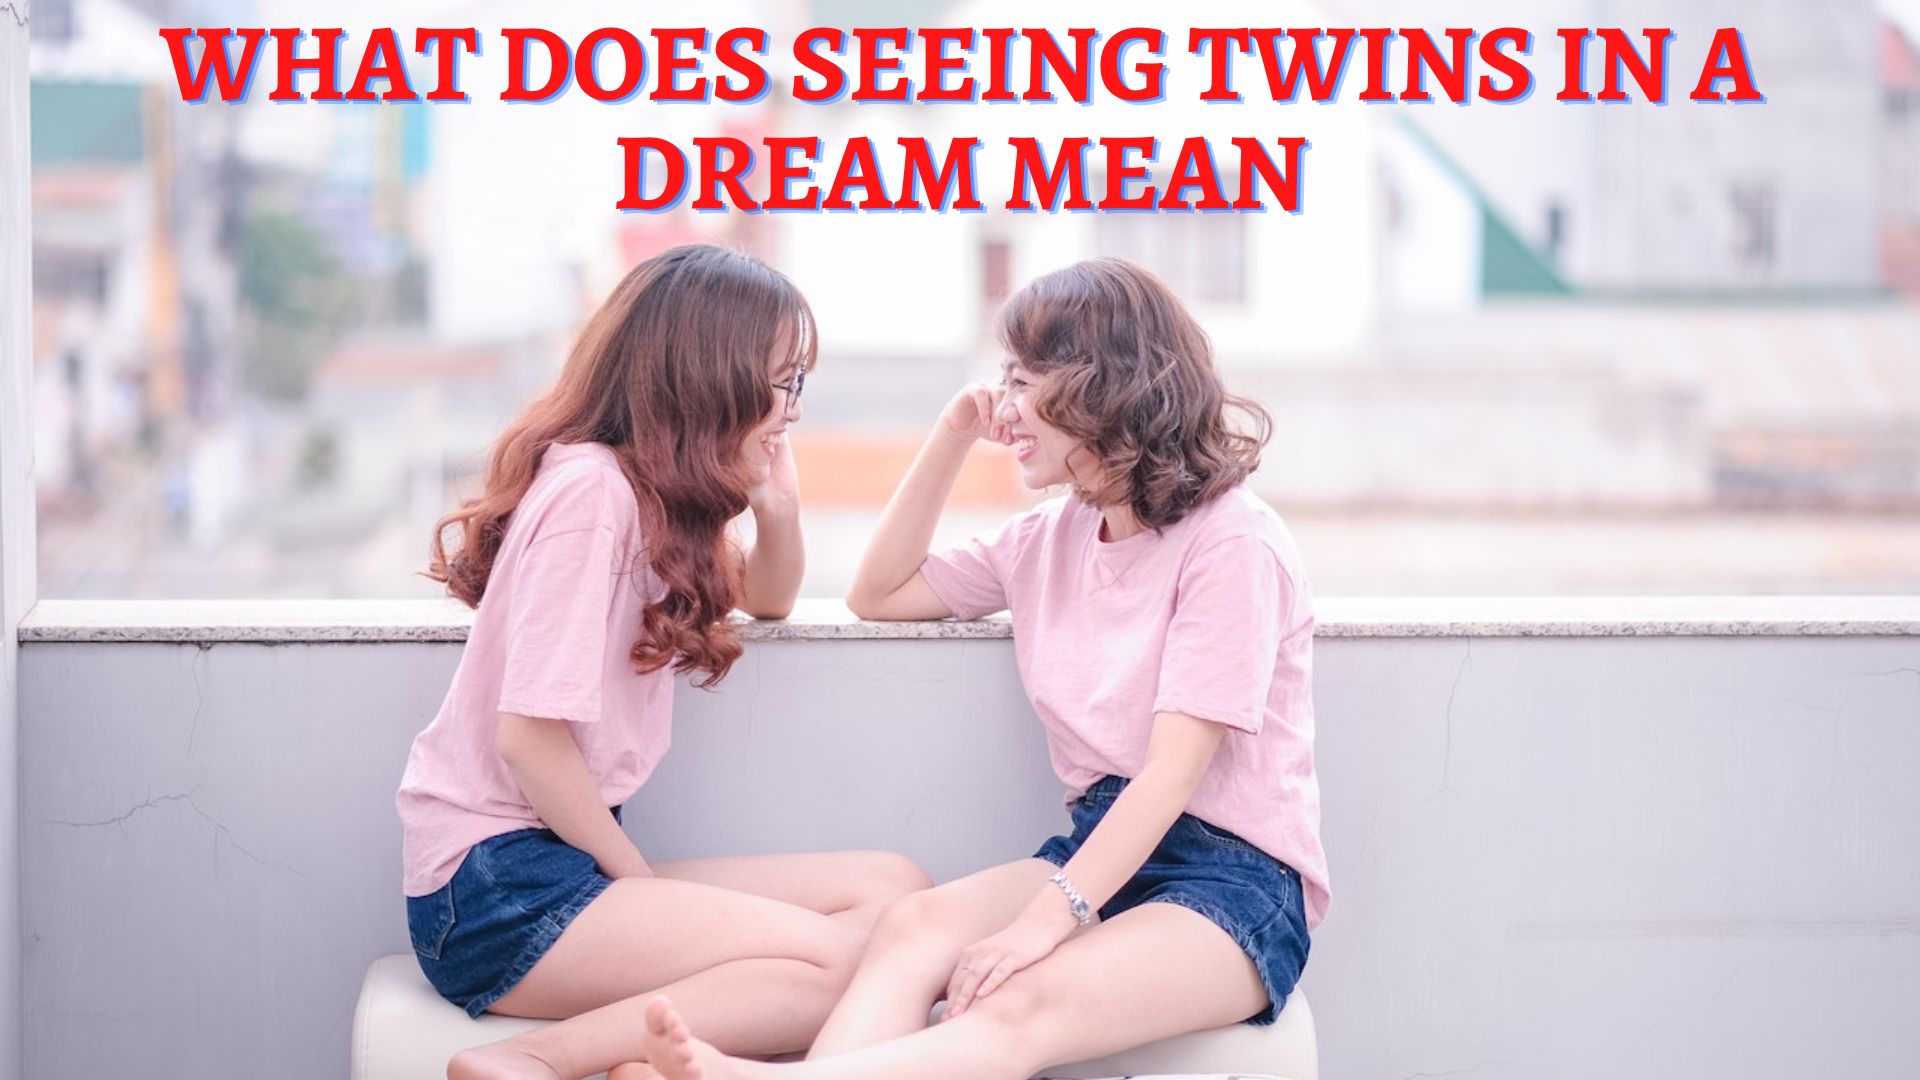 What Does Seeing Twins In A Dream Mean?